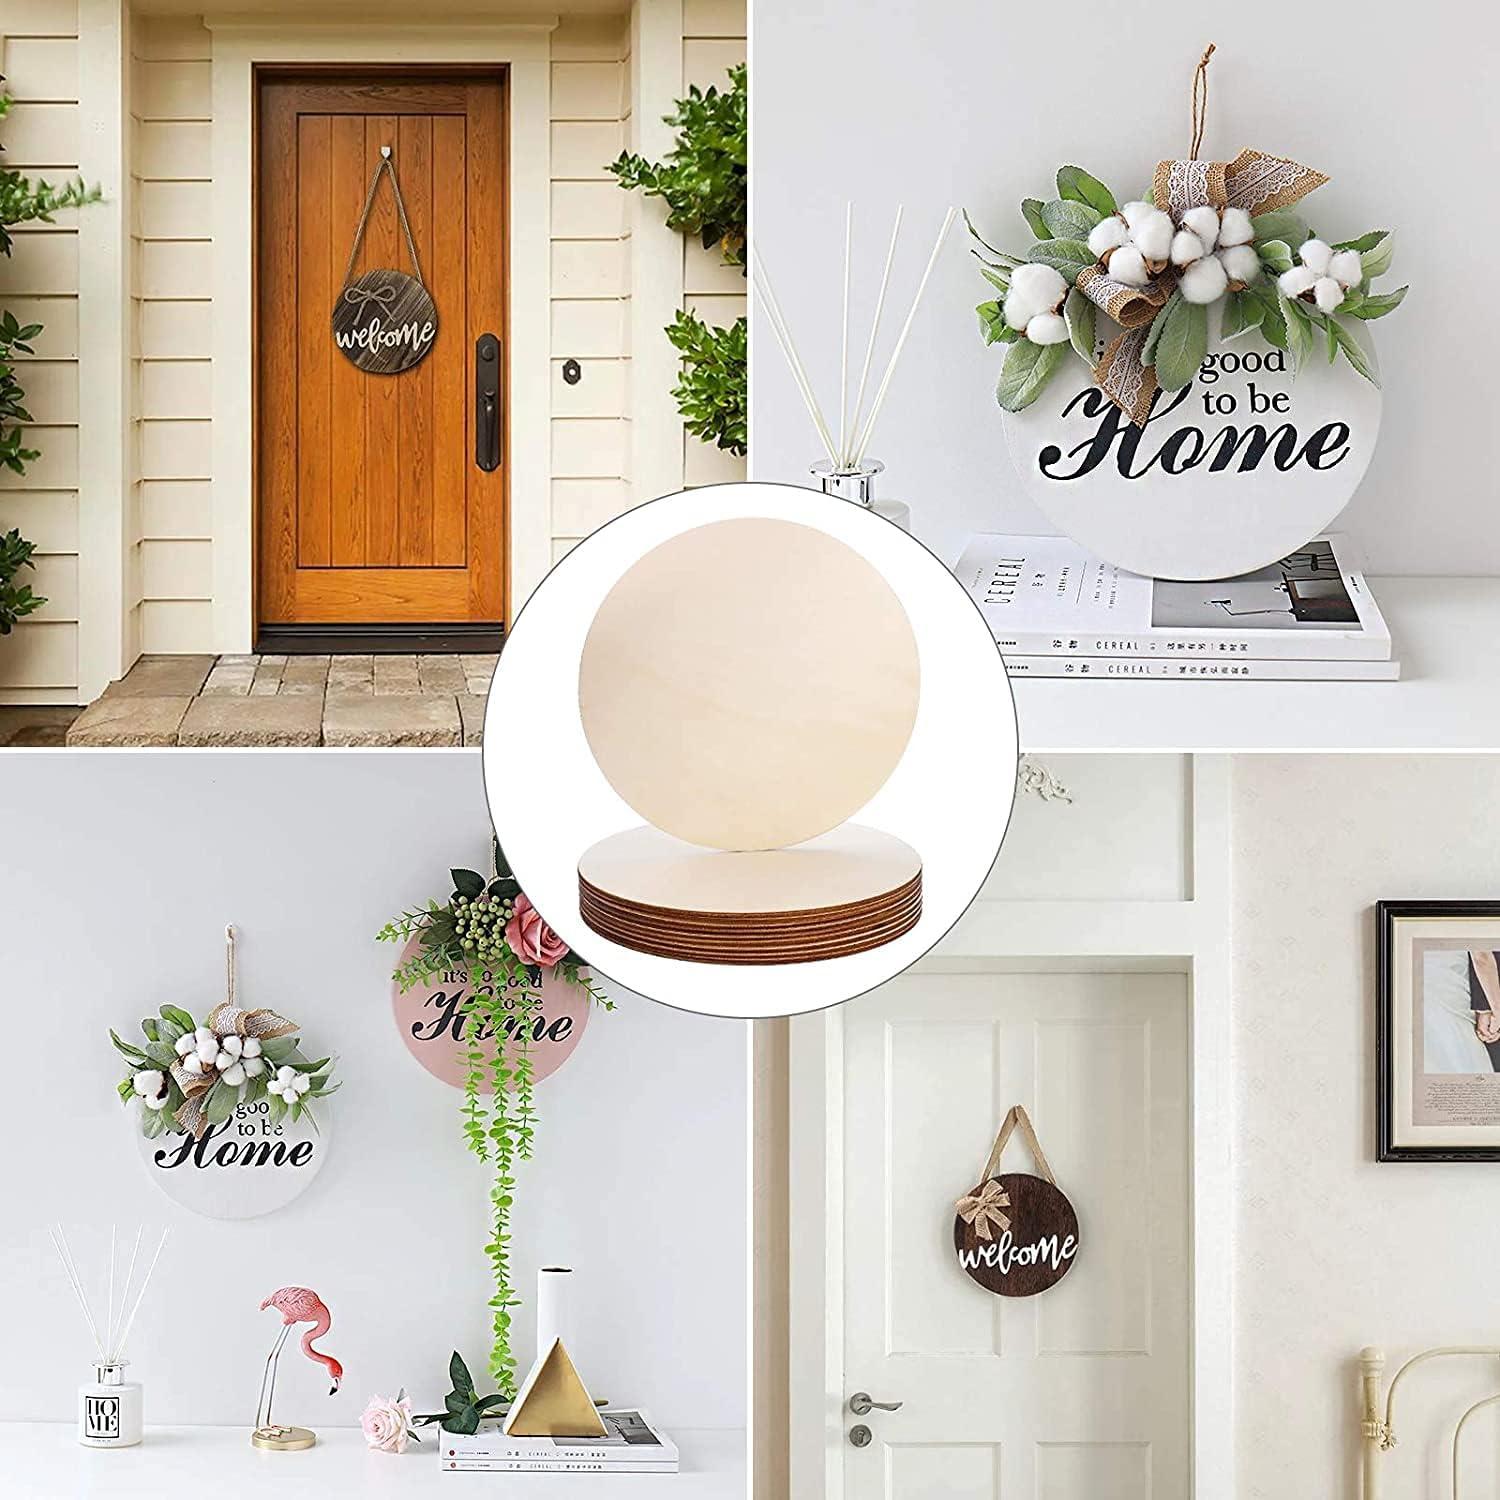 12 Pcs 16 Inch Wood Circles for Crafts Unfinished Round Wood Discs Blank  Wood Rounds Slices Round Wooden Door Hanger Signs with Bows, Twine and Glue